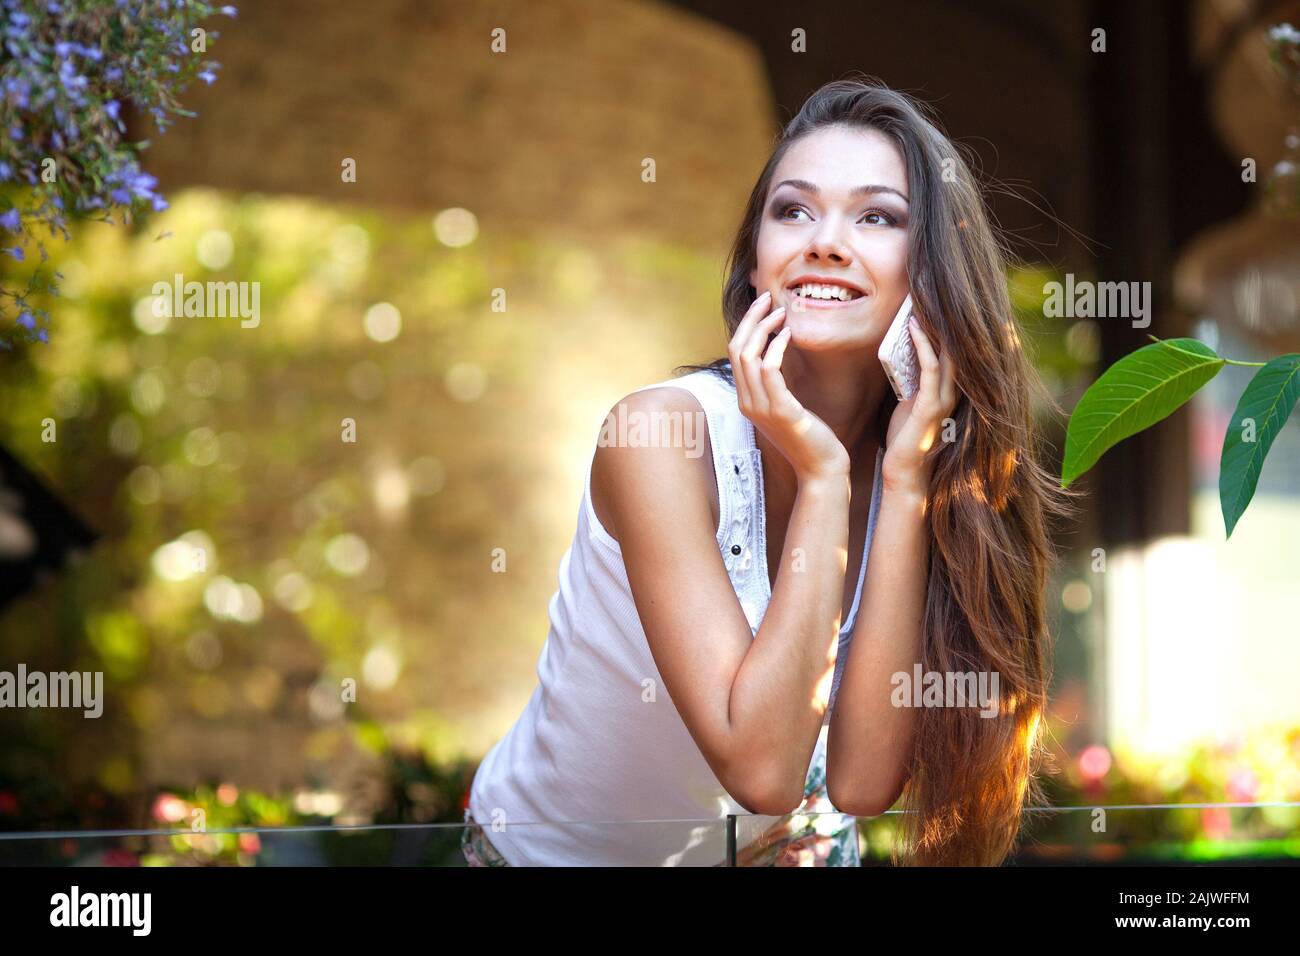 Close Up Of A Attractive Young Woman Speaking On Mobile Phone Stock Photo